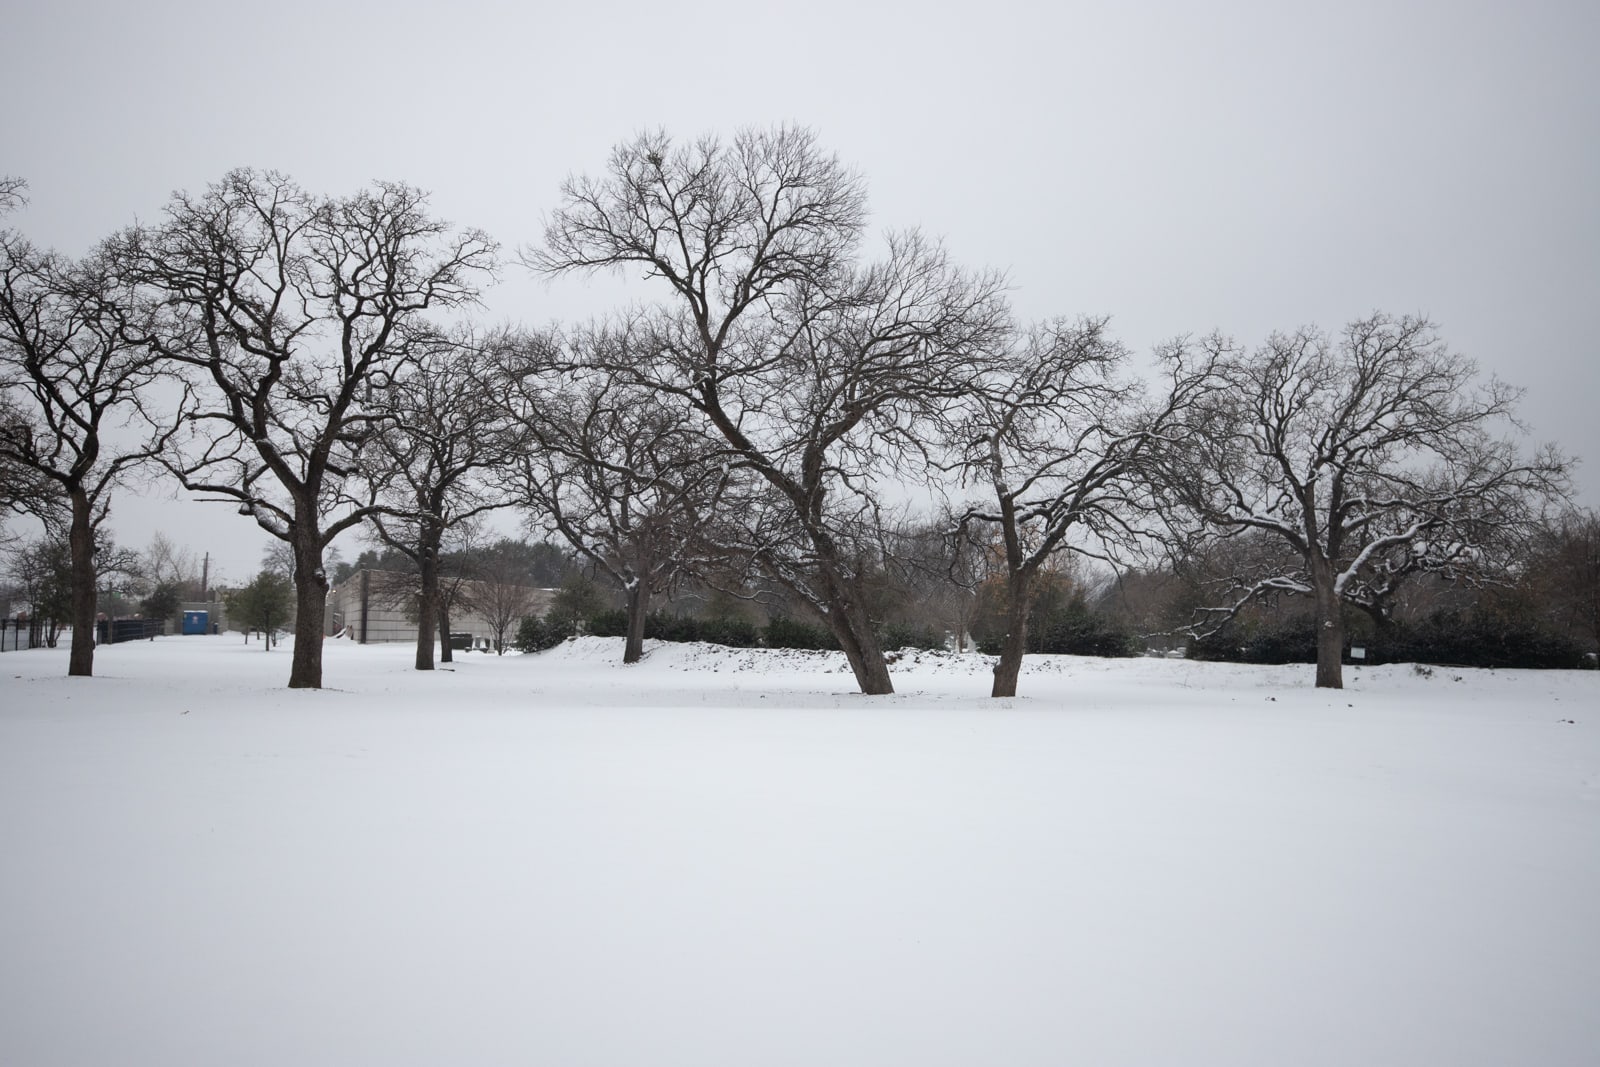 Park completely blanketed with pristine snow